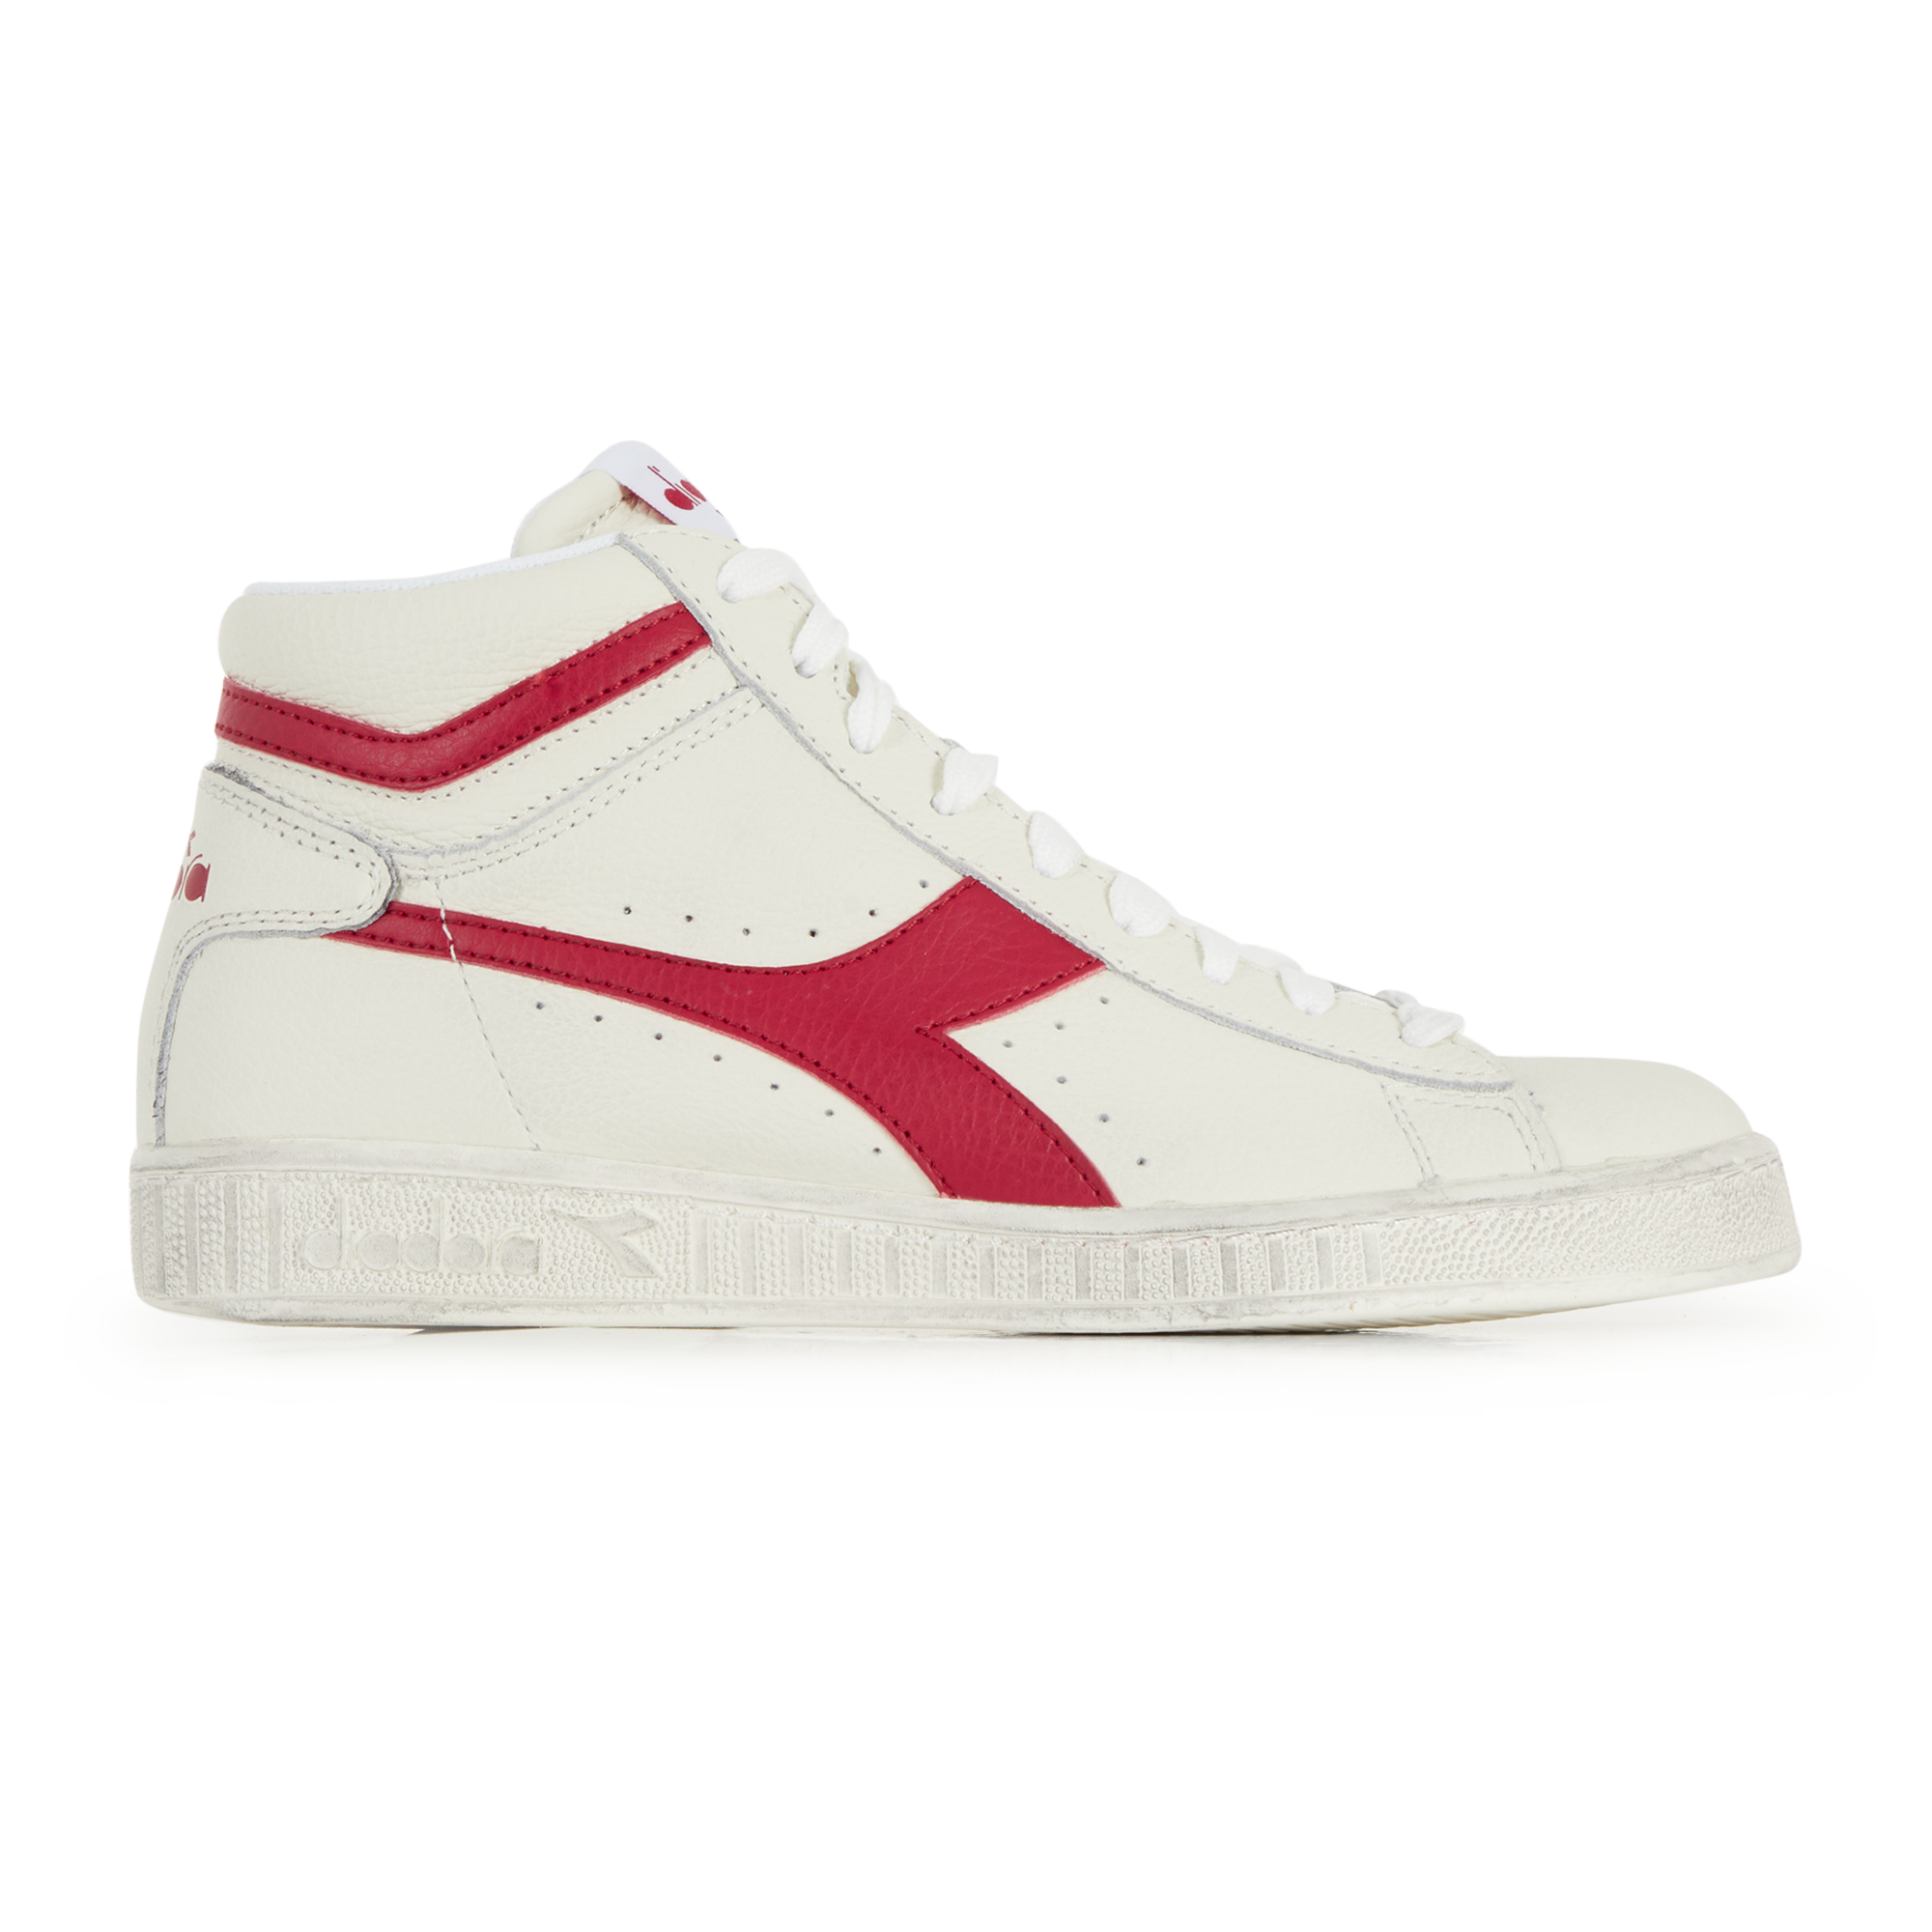 Diadora  GAME L HIGH WAXED  women's Shoes (High-top Trainers) in White - 501-178300-C5147